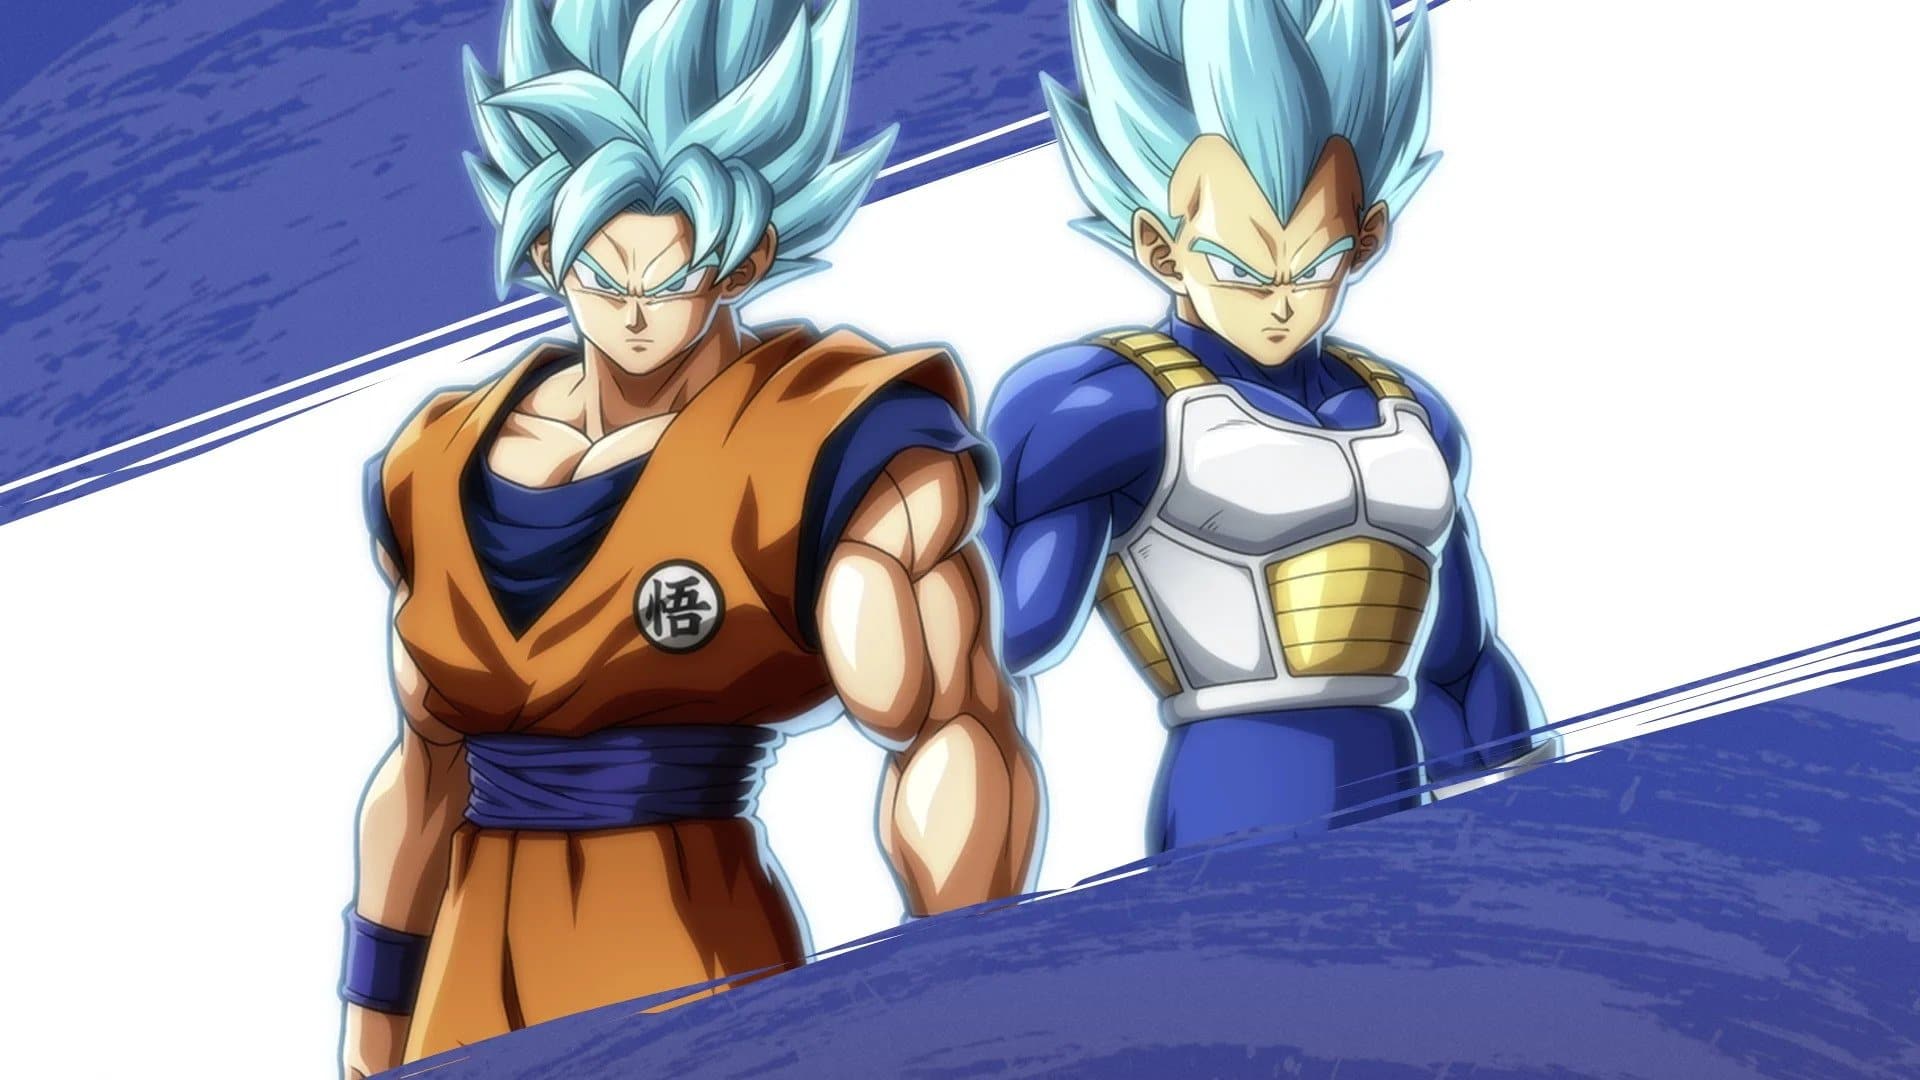 Dragon Ball Super: Vegeta Has Gained More Perspective and He's Never Going Back!